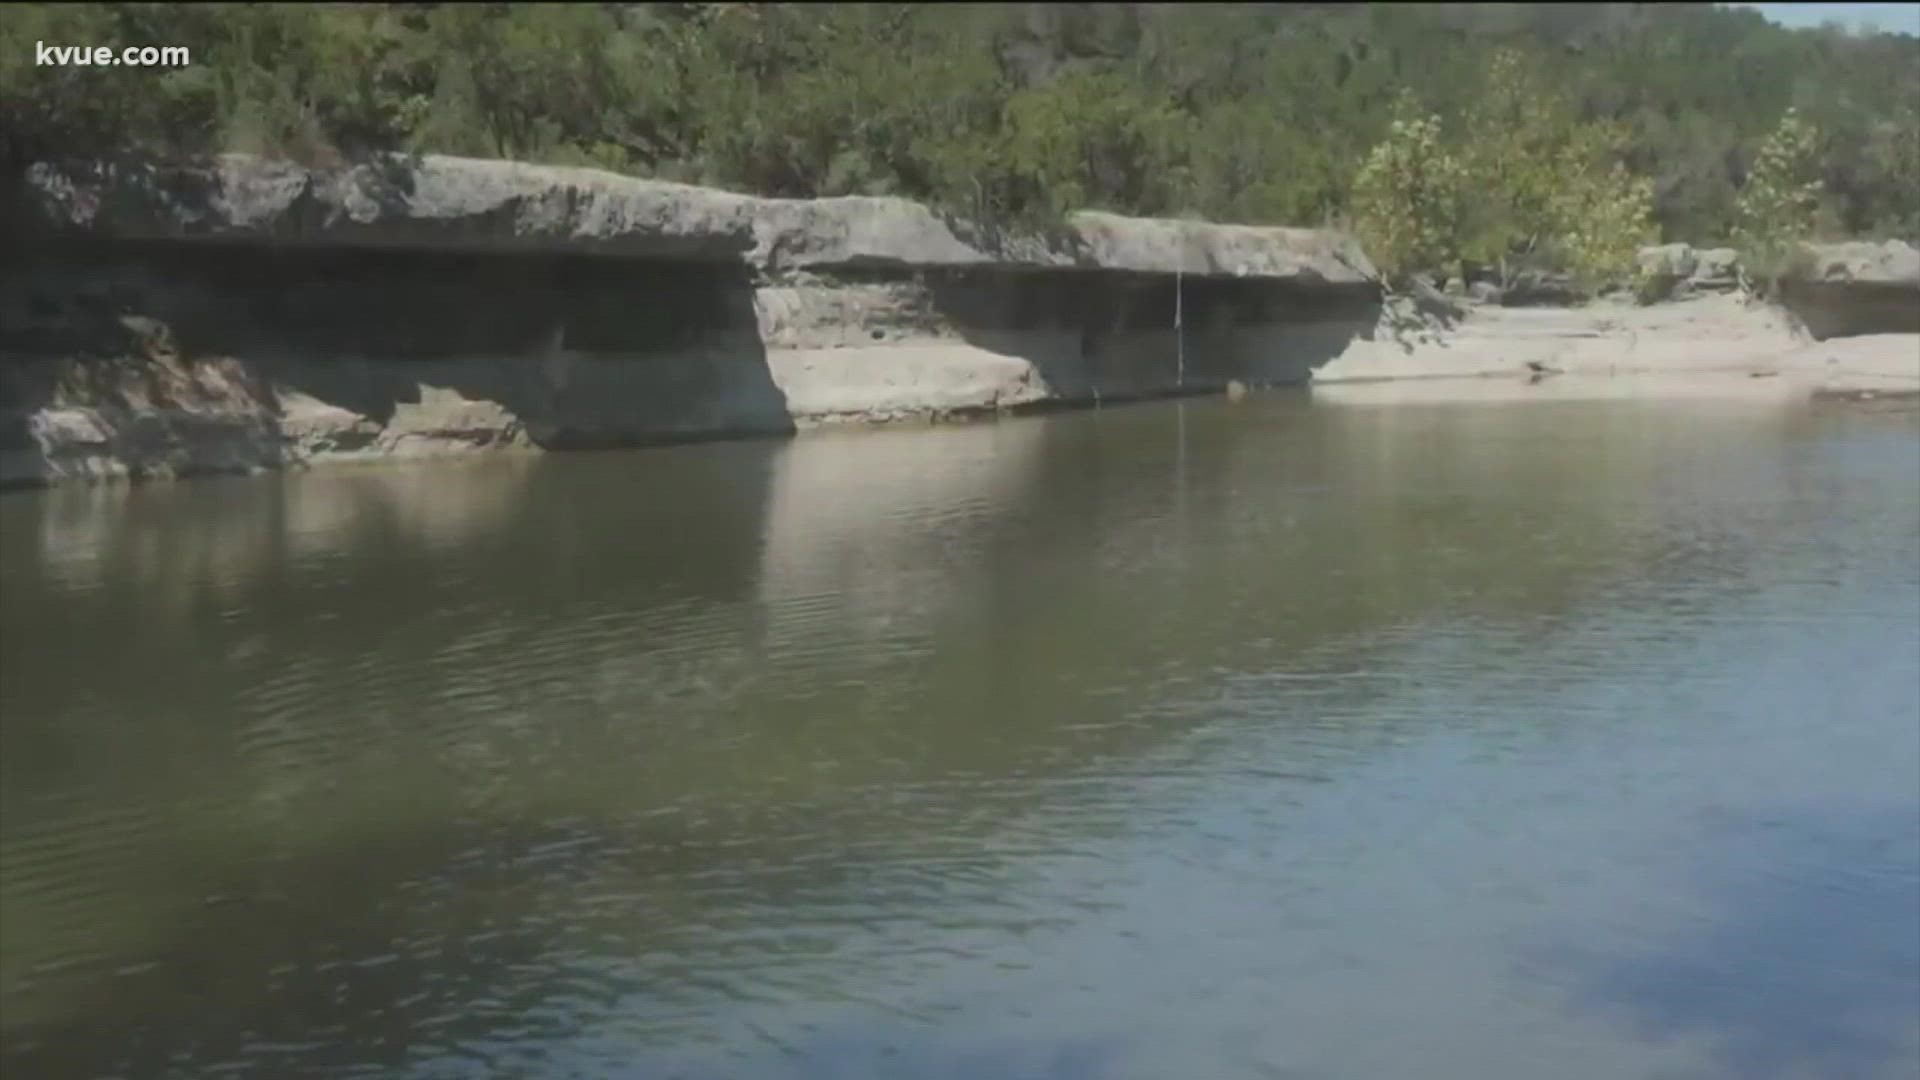 Health experts are worried about what they found in Barton Creek, near Sculpture Falls, last week. A rare toxin in the water poses a threat to pets and humans.